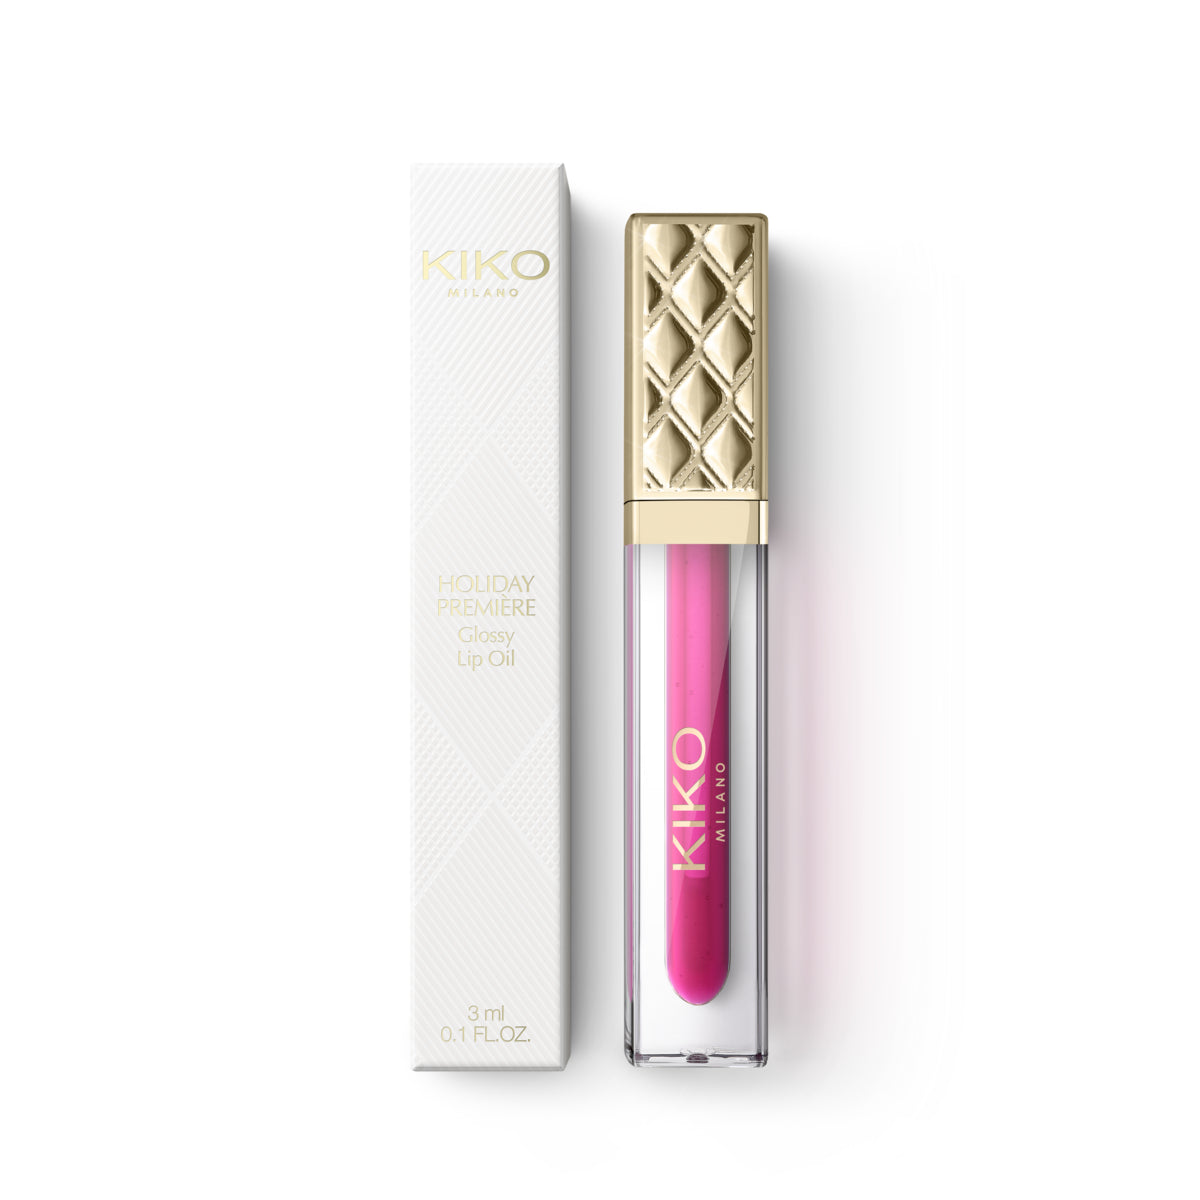 Holiday Première Glossy Lip Oil